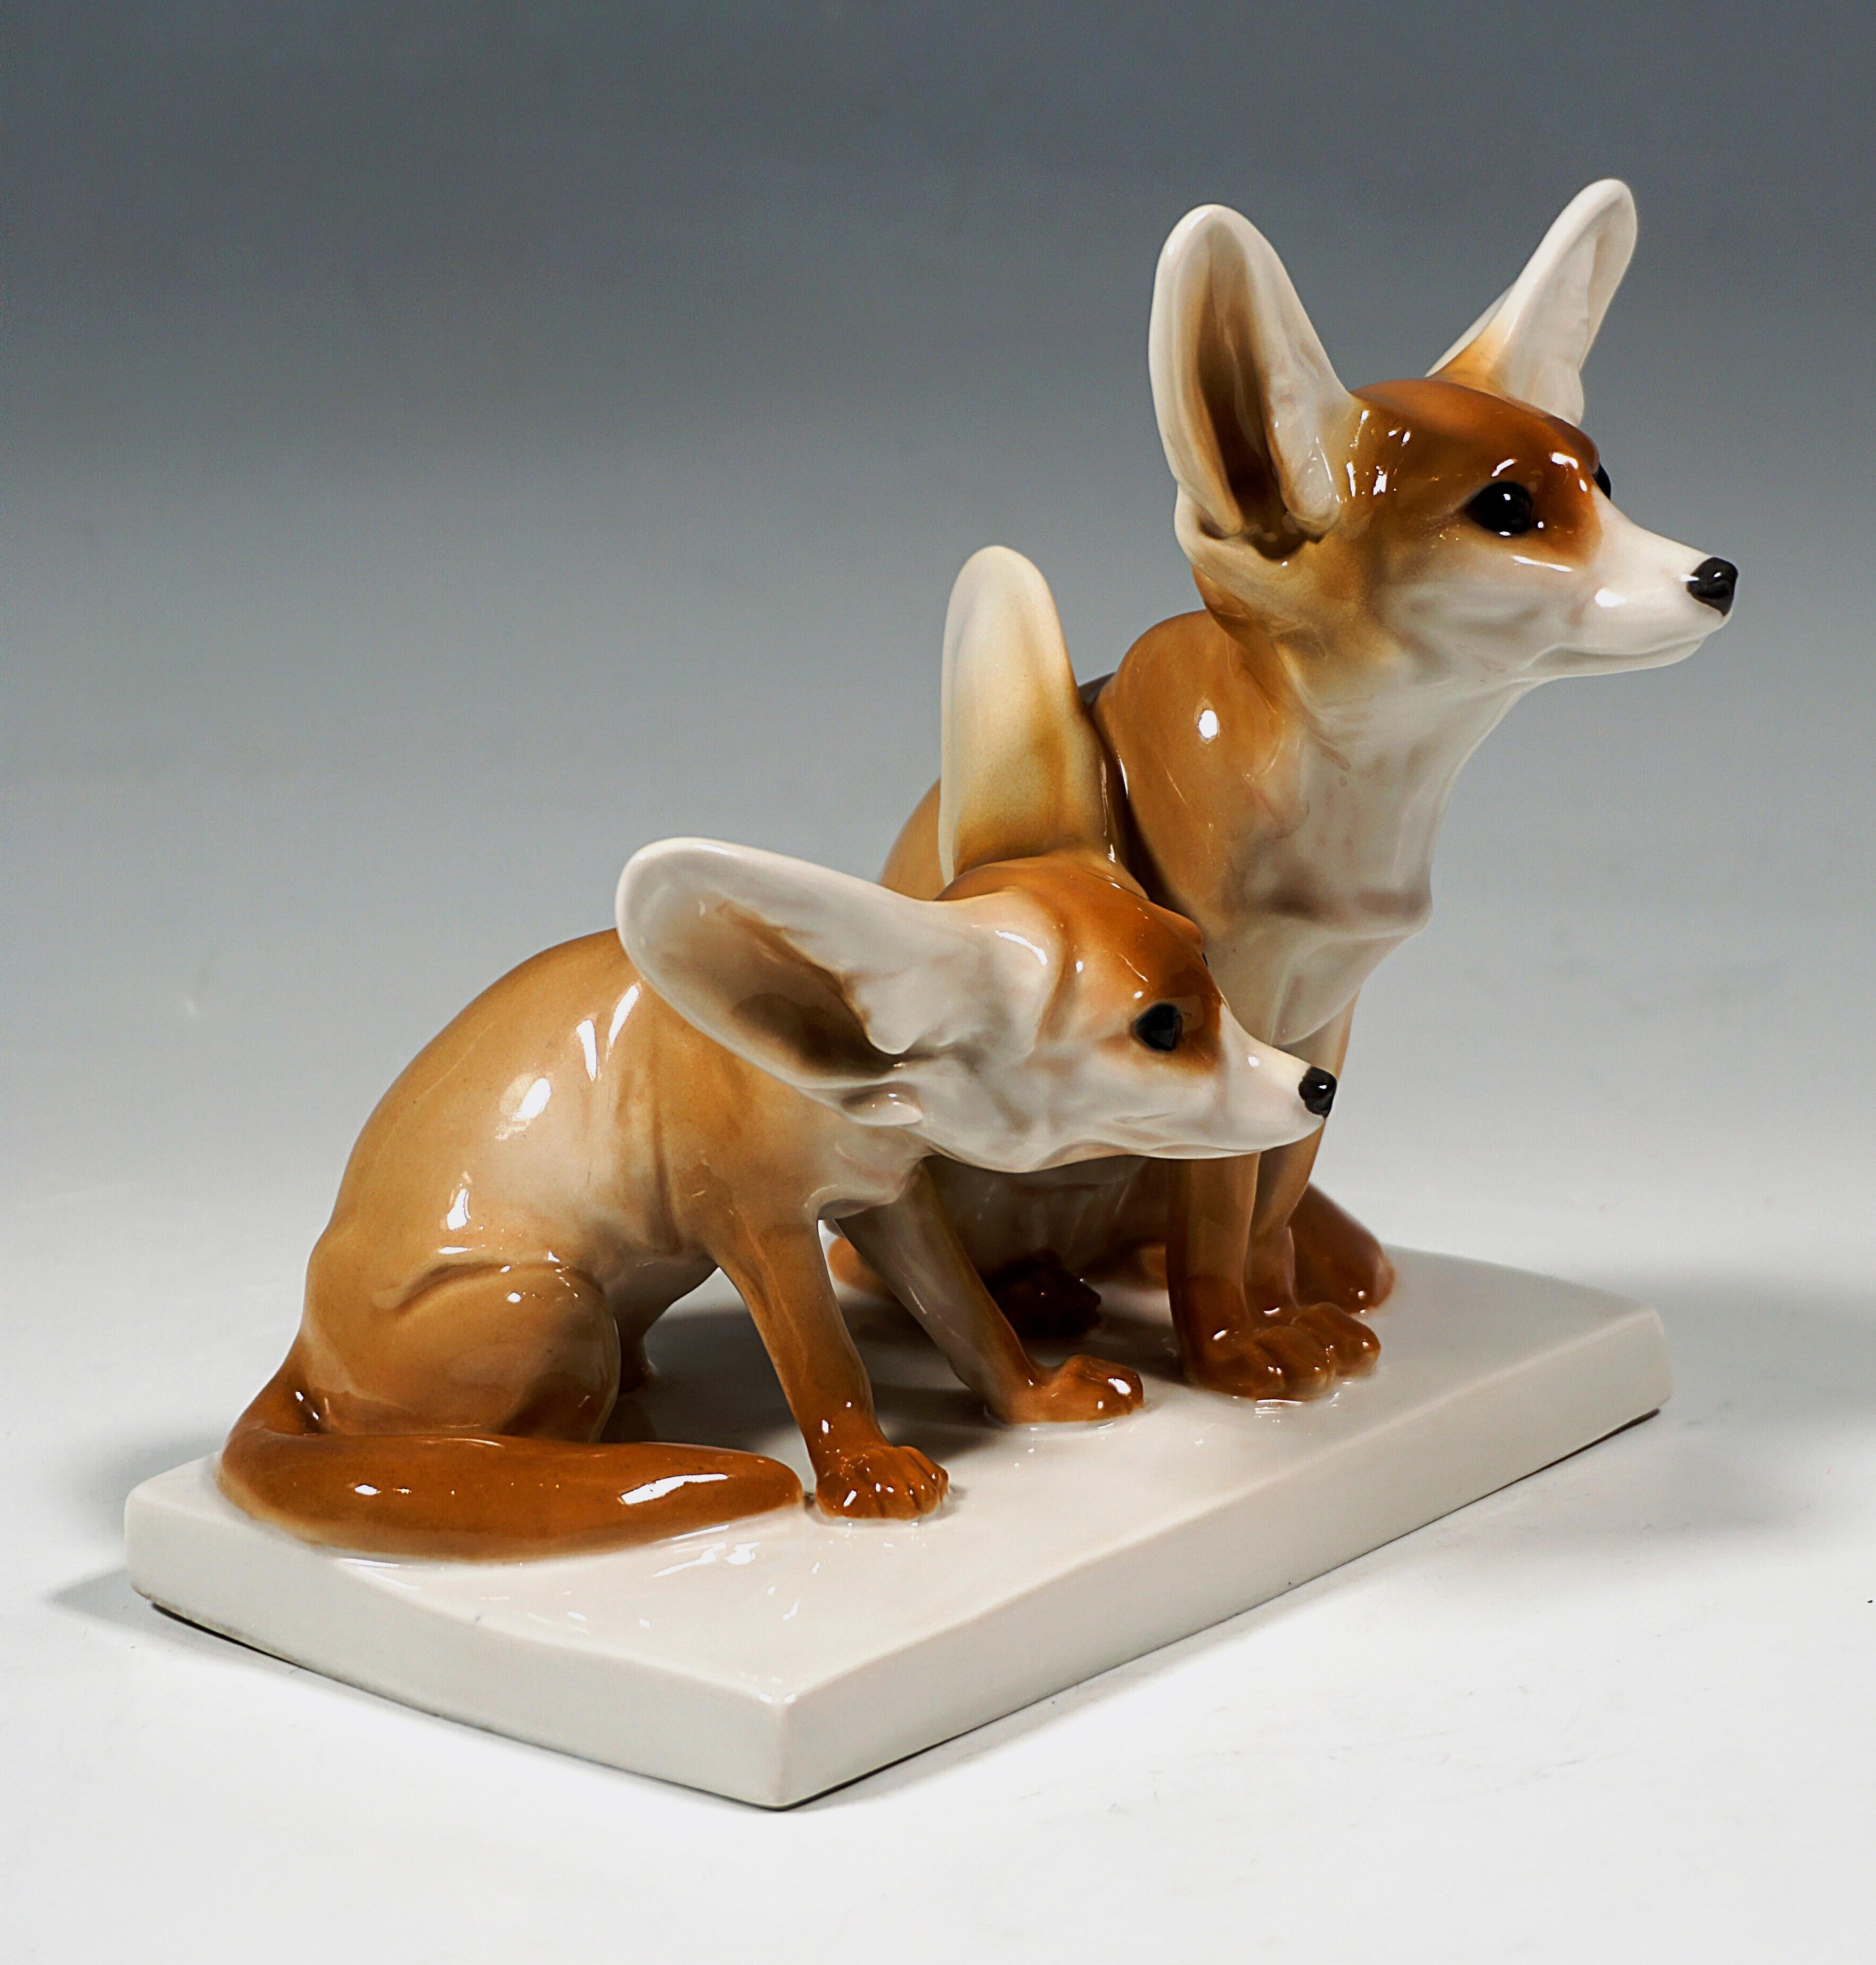 Lifelike depiction of two side by side sitting fennec foxes with the characteristic large ears, the smallest of all wild dogs and native to the sandy deserts of North Africa.
On a white, flat rectangular base. 

Designer:
OTTO PILZ (1876 -